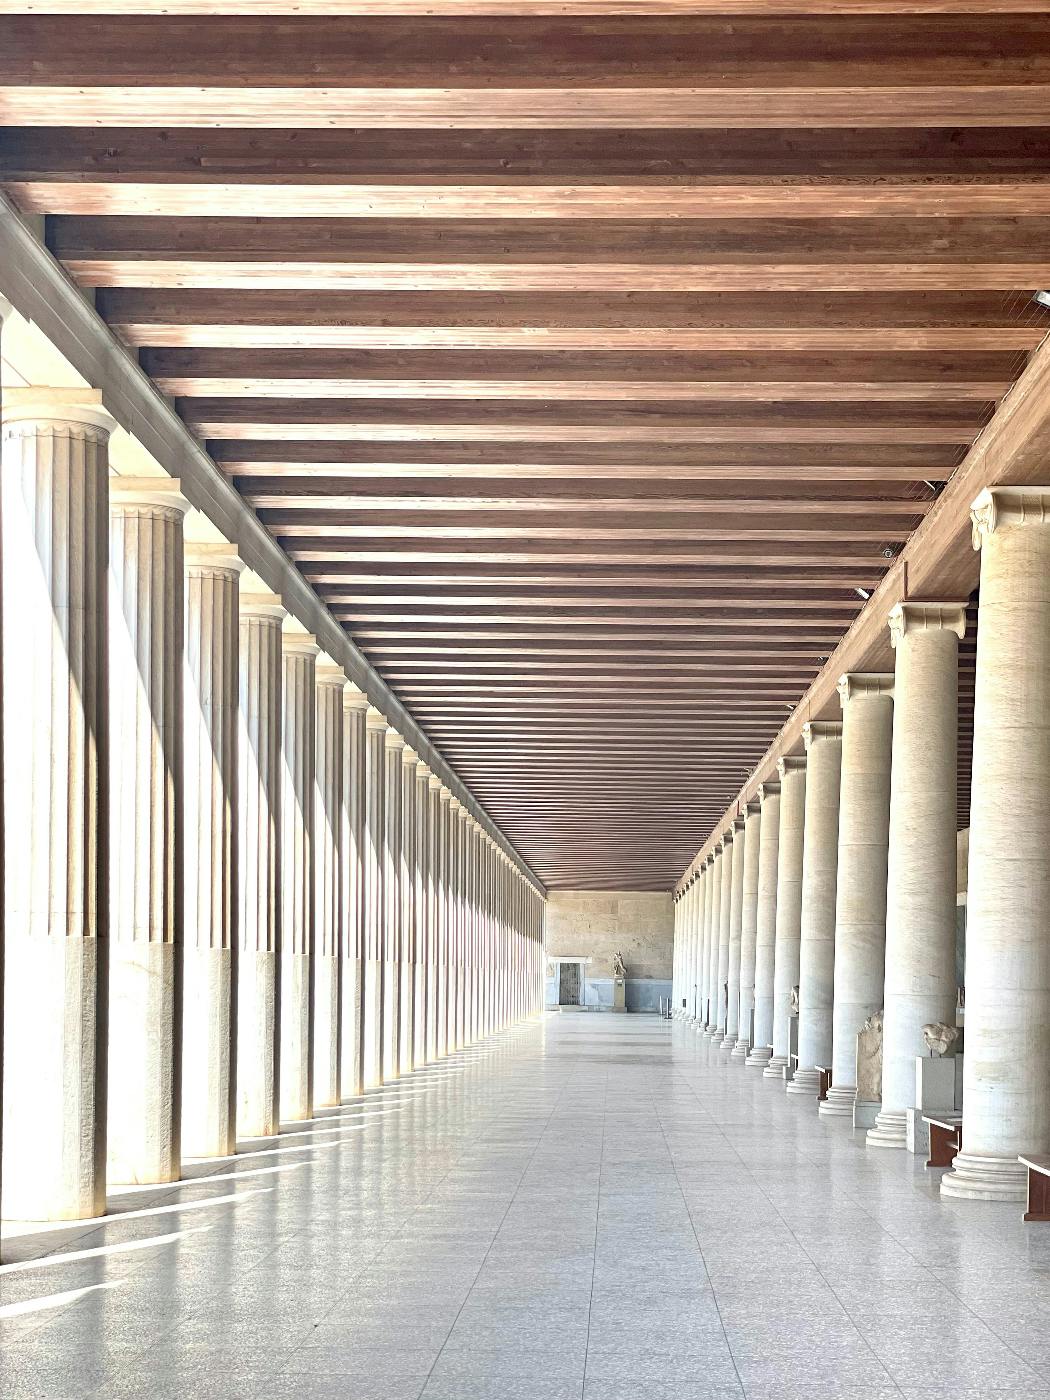 A perfectly symetrical hall with columns